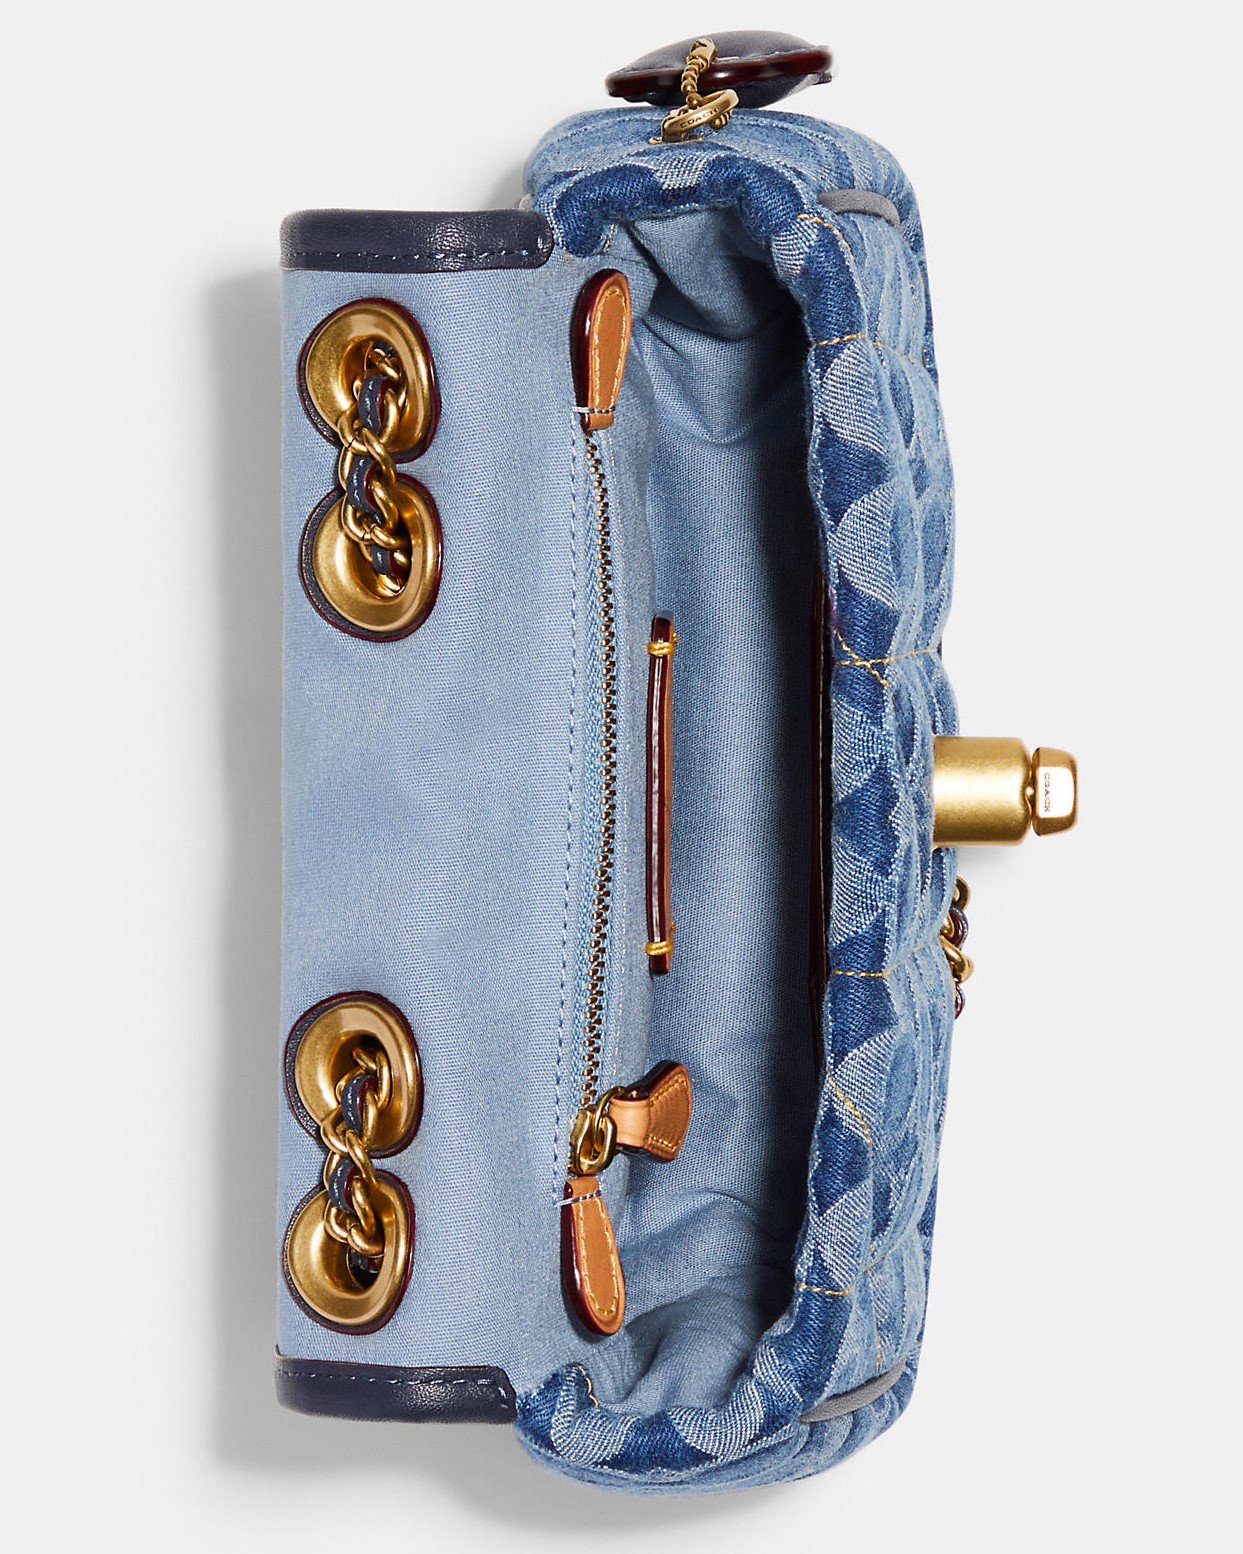 TÚI ĐEO CHÉO COACH PILLOW MADISON SHOULDER BAG 18 IN SIGNAUTURE DENIM WITH QUILTING 1